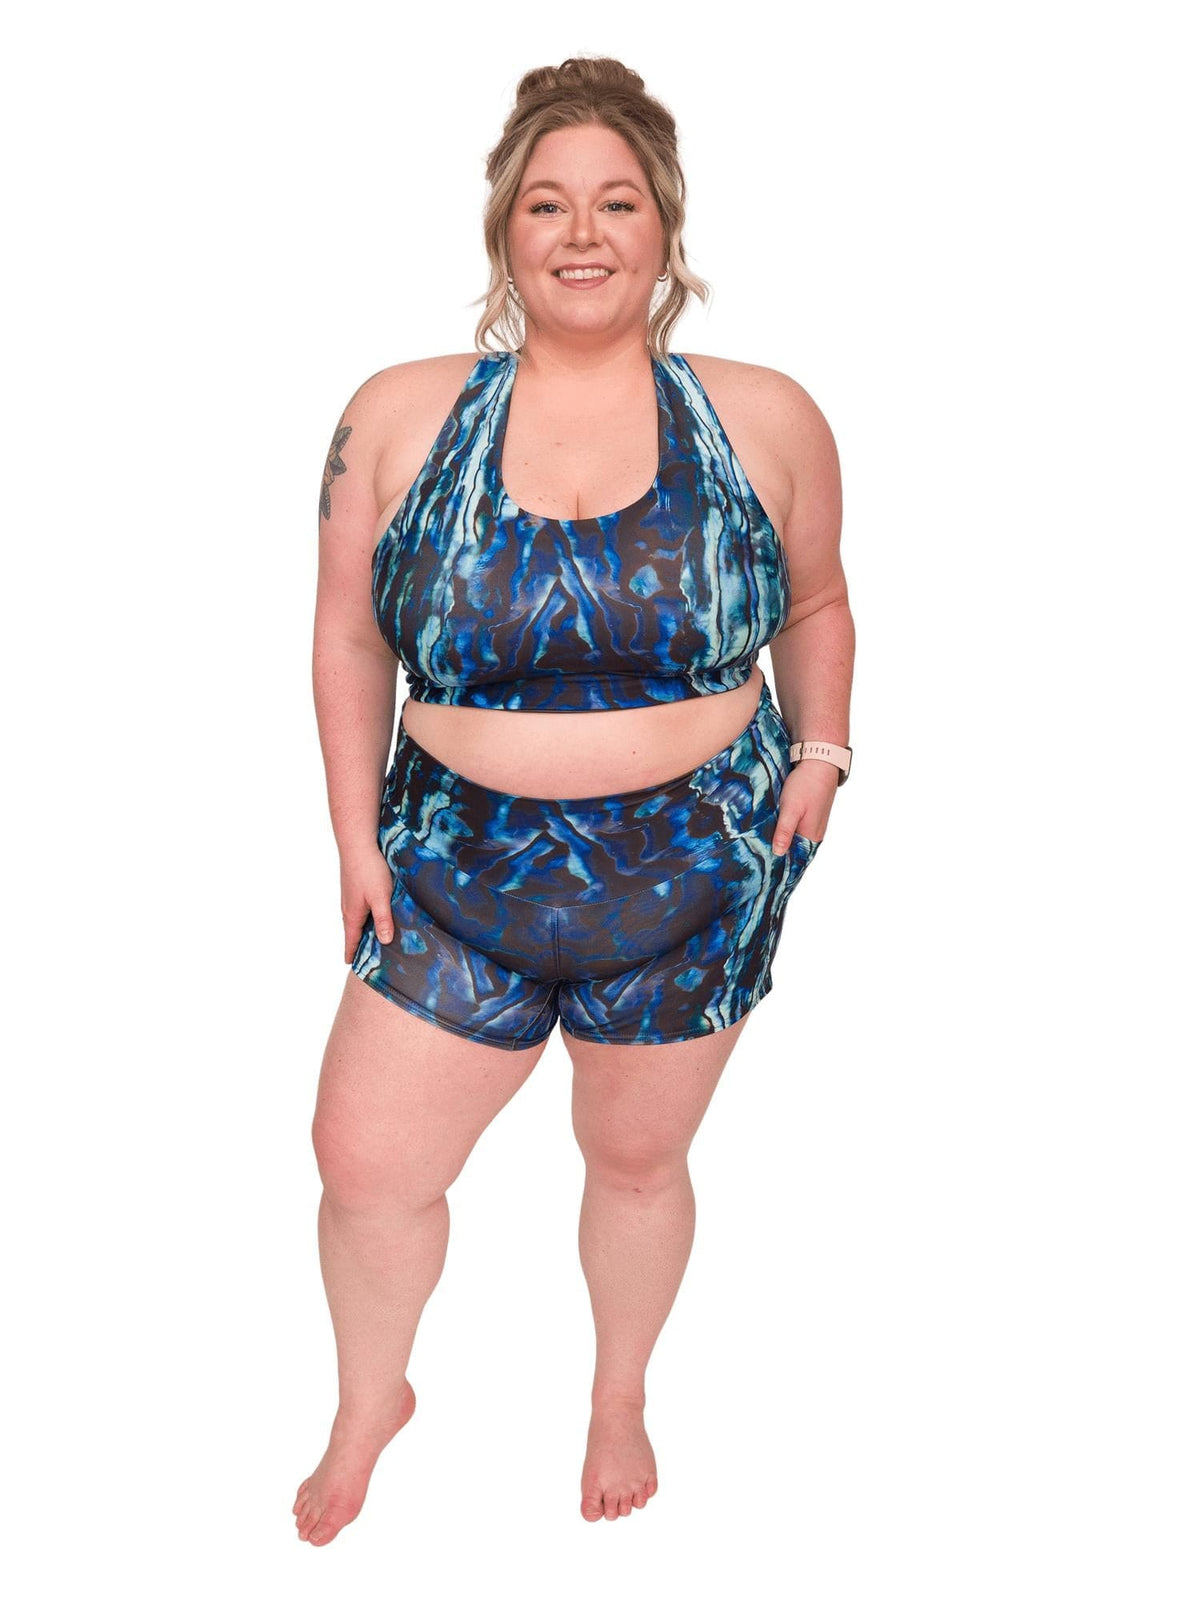 Model: Chelsea is a marine conservationist who believes that science is for everybody… and every BODY! She is 5&#39;2&quot;, 230 lbs, 40DD and is wearing 3XL shorts and a 3XL reversible top.